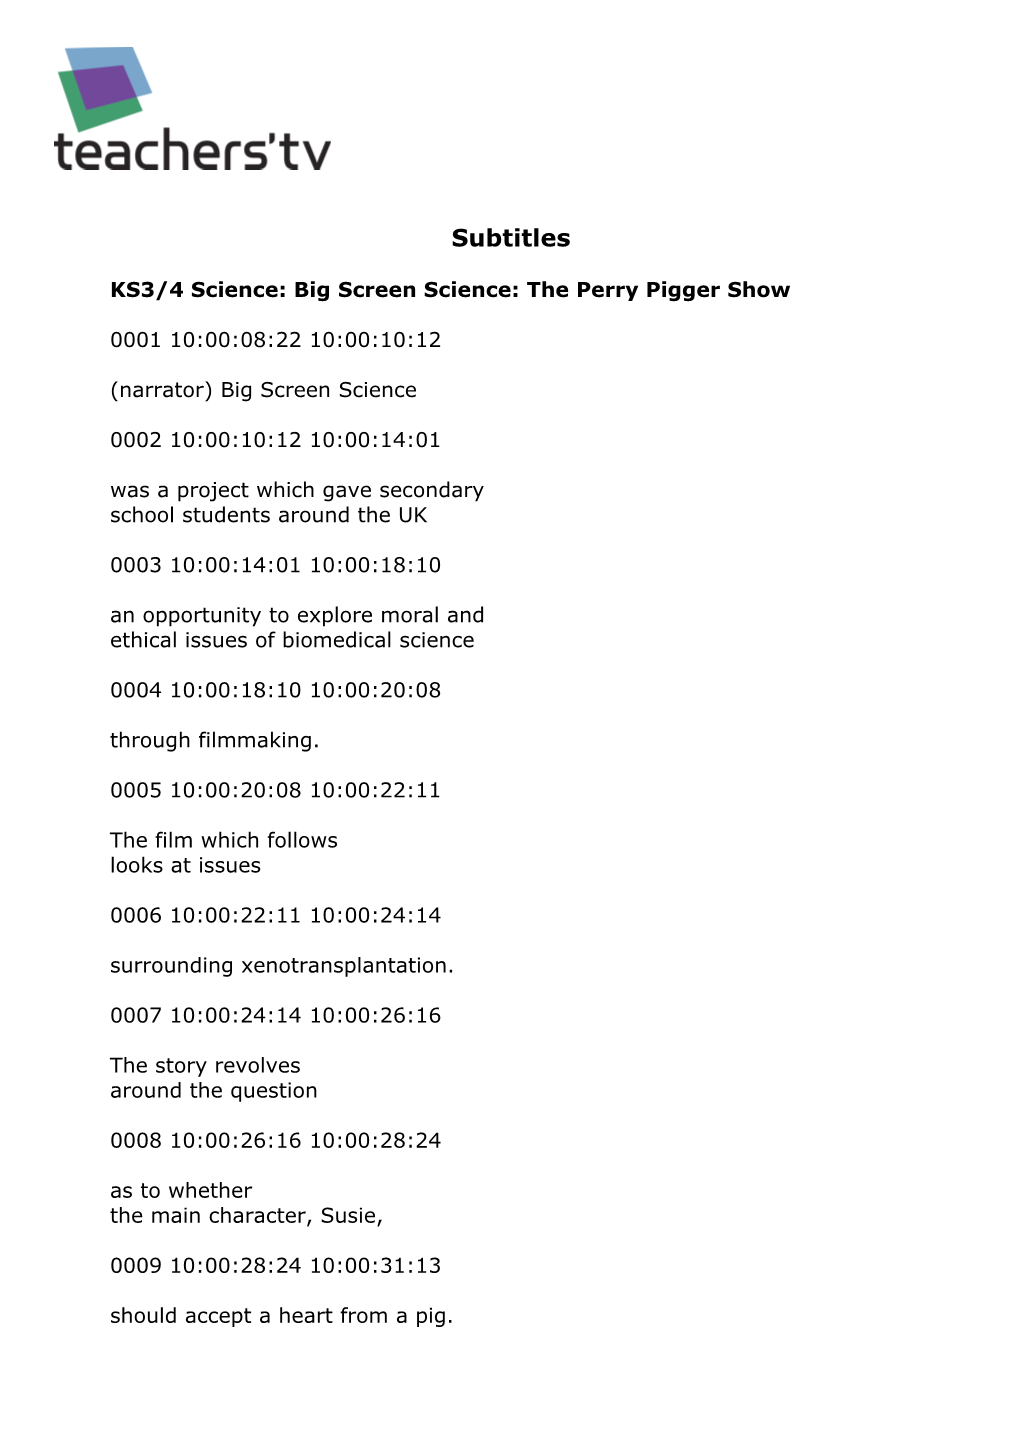 KS3/4 Science: Big Screen Science: the Perry Pigger Show